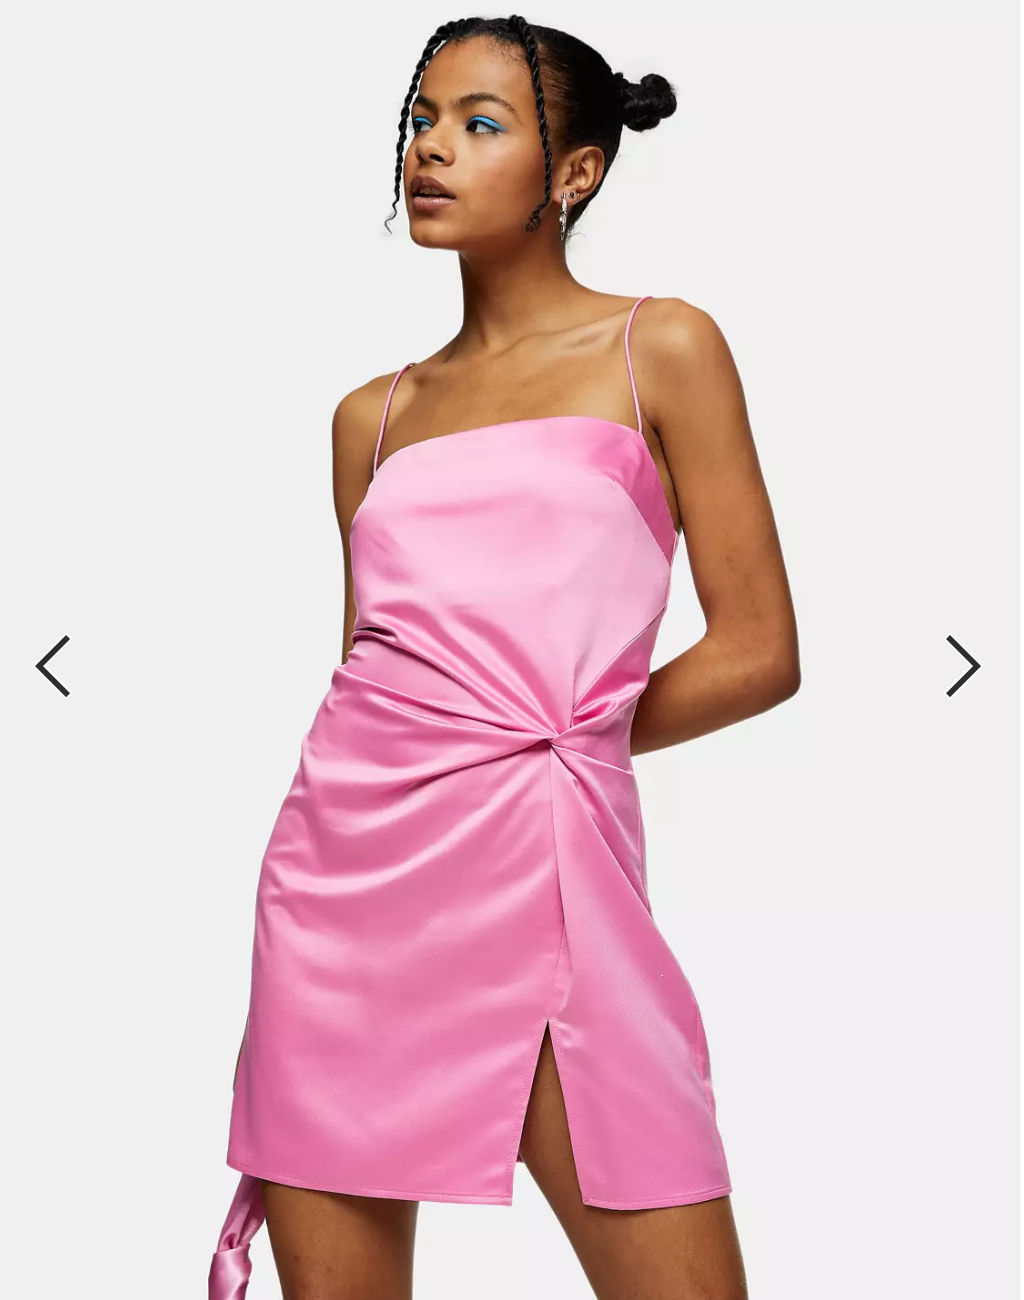 Topshop satin mini dress with knot detail in pink - 0246